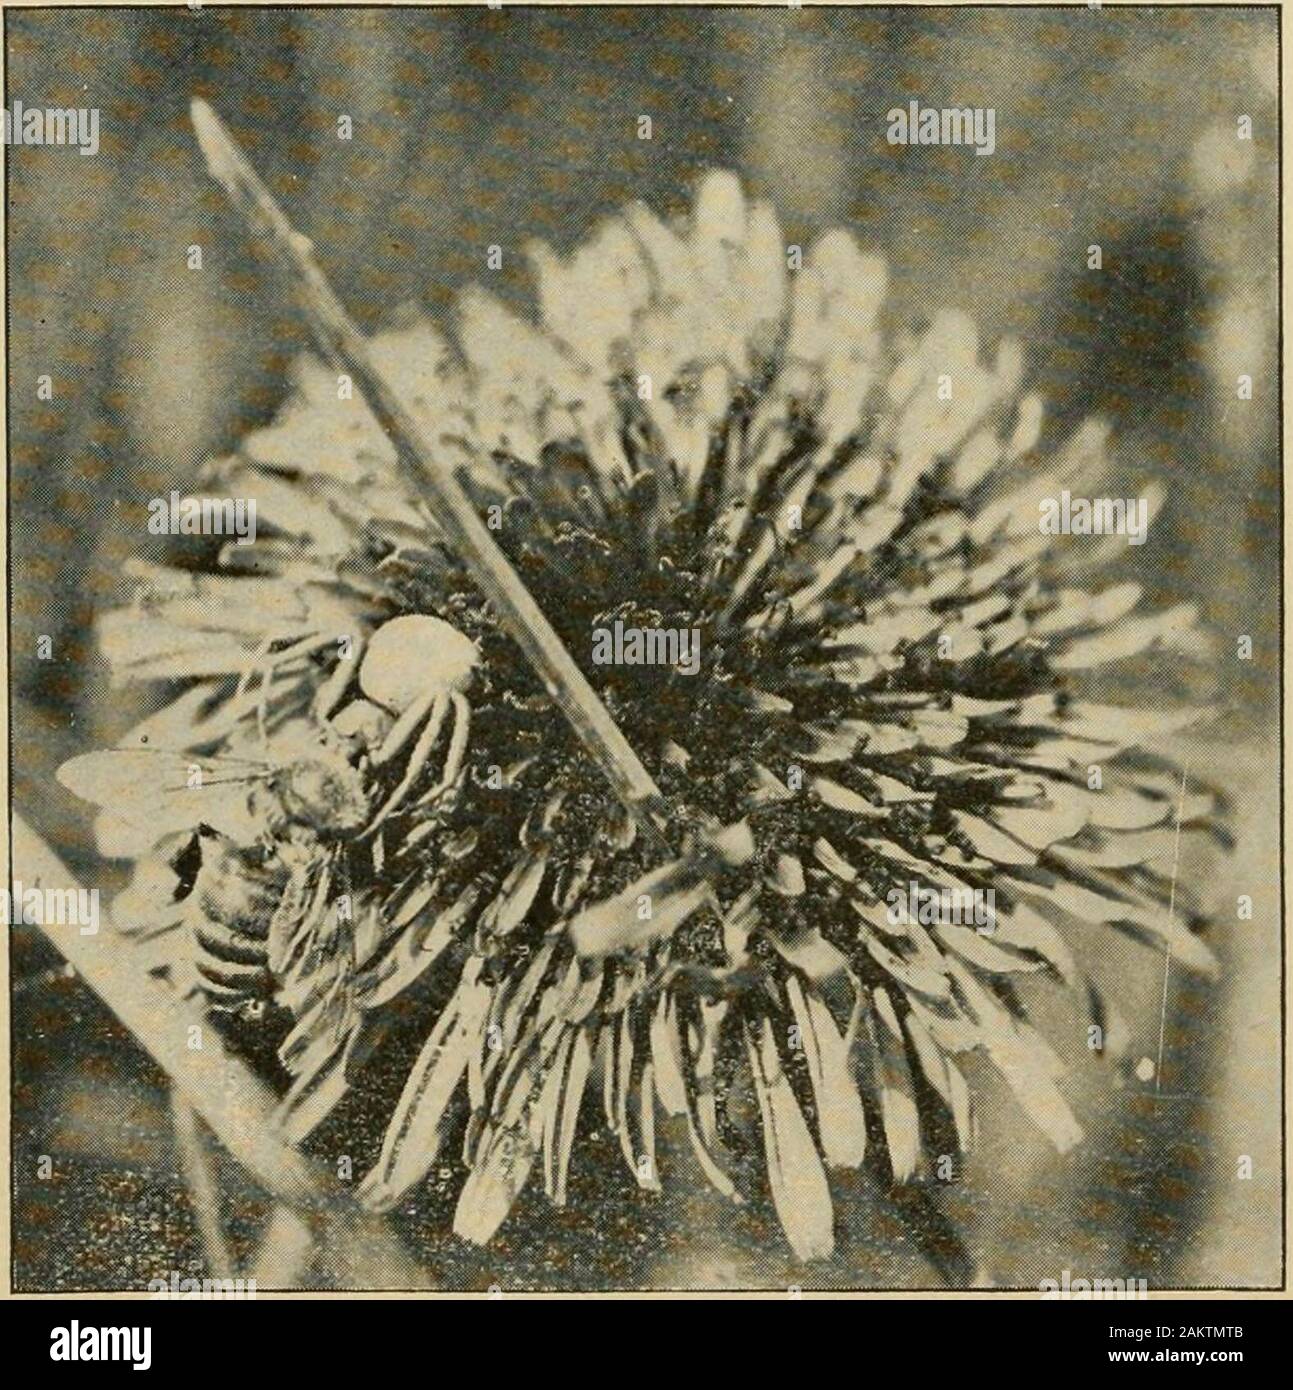 Gleanings in bee culture . intheir order of hardiness as observed by him: E. paidiflora ascends to 4600 feet in Tas-mania 132G GLEANINGS IN BEP: CULTURE. Oct. 15 E. giinnii ascends to 5600 ft. in Australia. E. coccifera ascends to 4000 feet in Tas-mania. E. Urnigera suffers little damage in Scot-land, York, and Devon from frost. E. Muellerii withstood 26° of frost in Ota-go, New Zealand. E. Stuartiana, fastest growing of all hardyeucalypts. E. Sieberiana, small plants have with-stood 20° of frost. E. amygdalina, small plant, and grows inTasmania at 4000 feet elevation. E. regnans has withstood Stock Photo